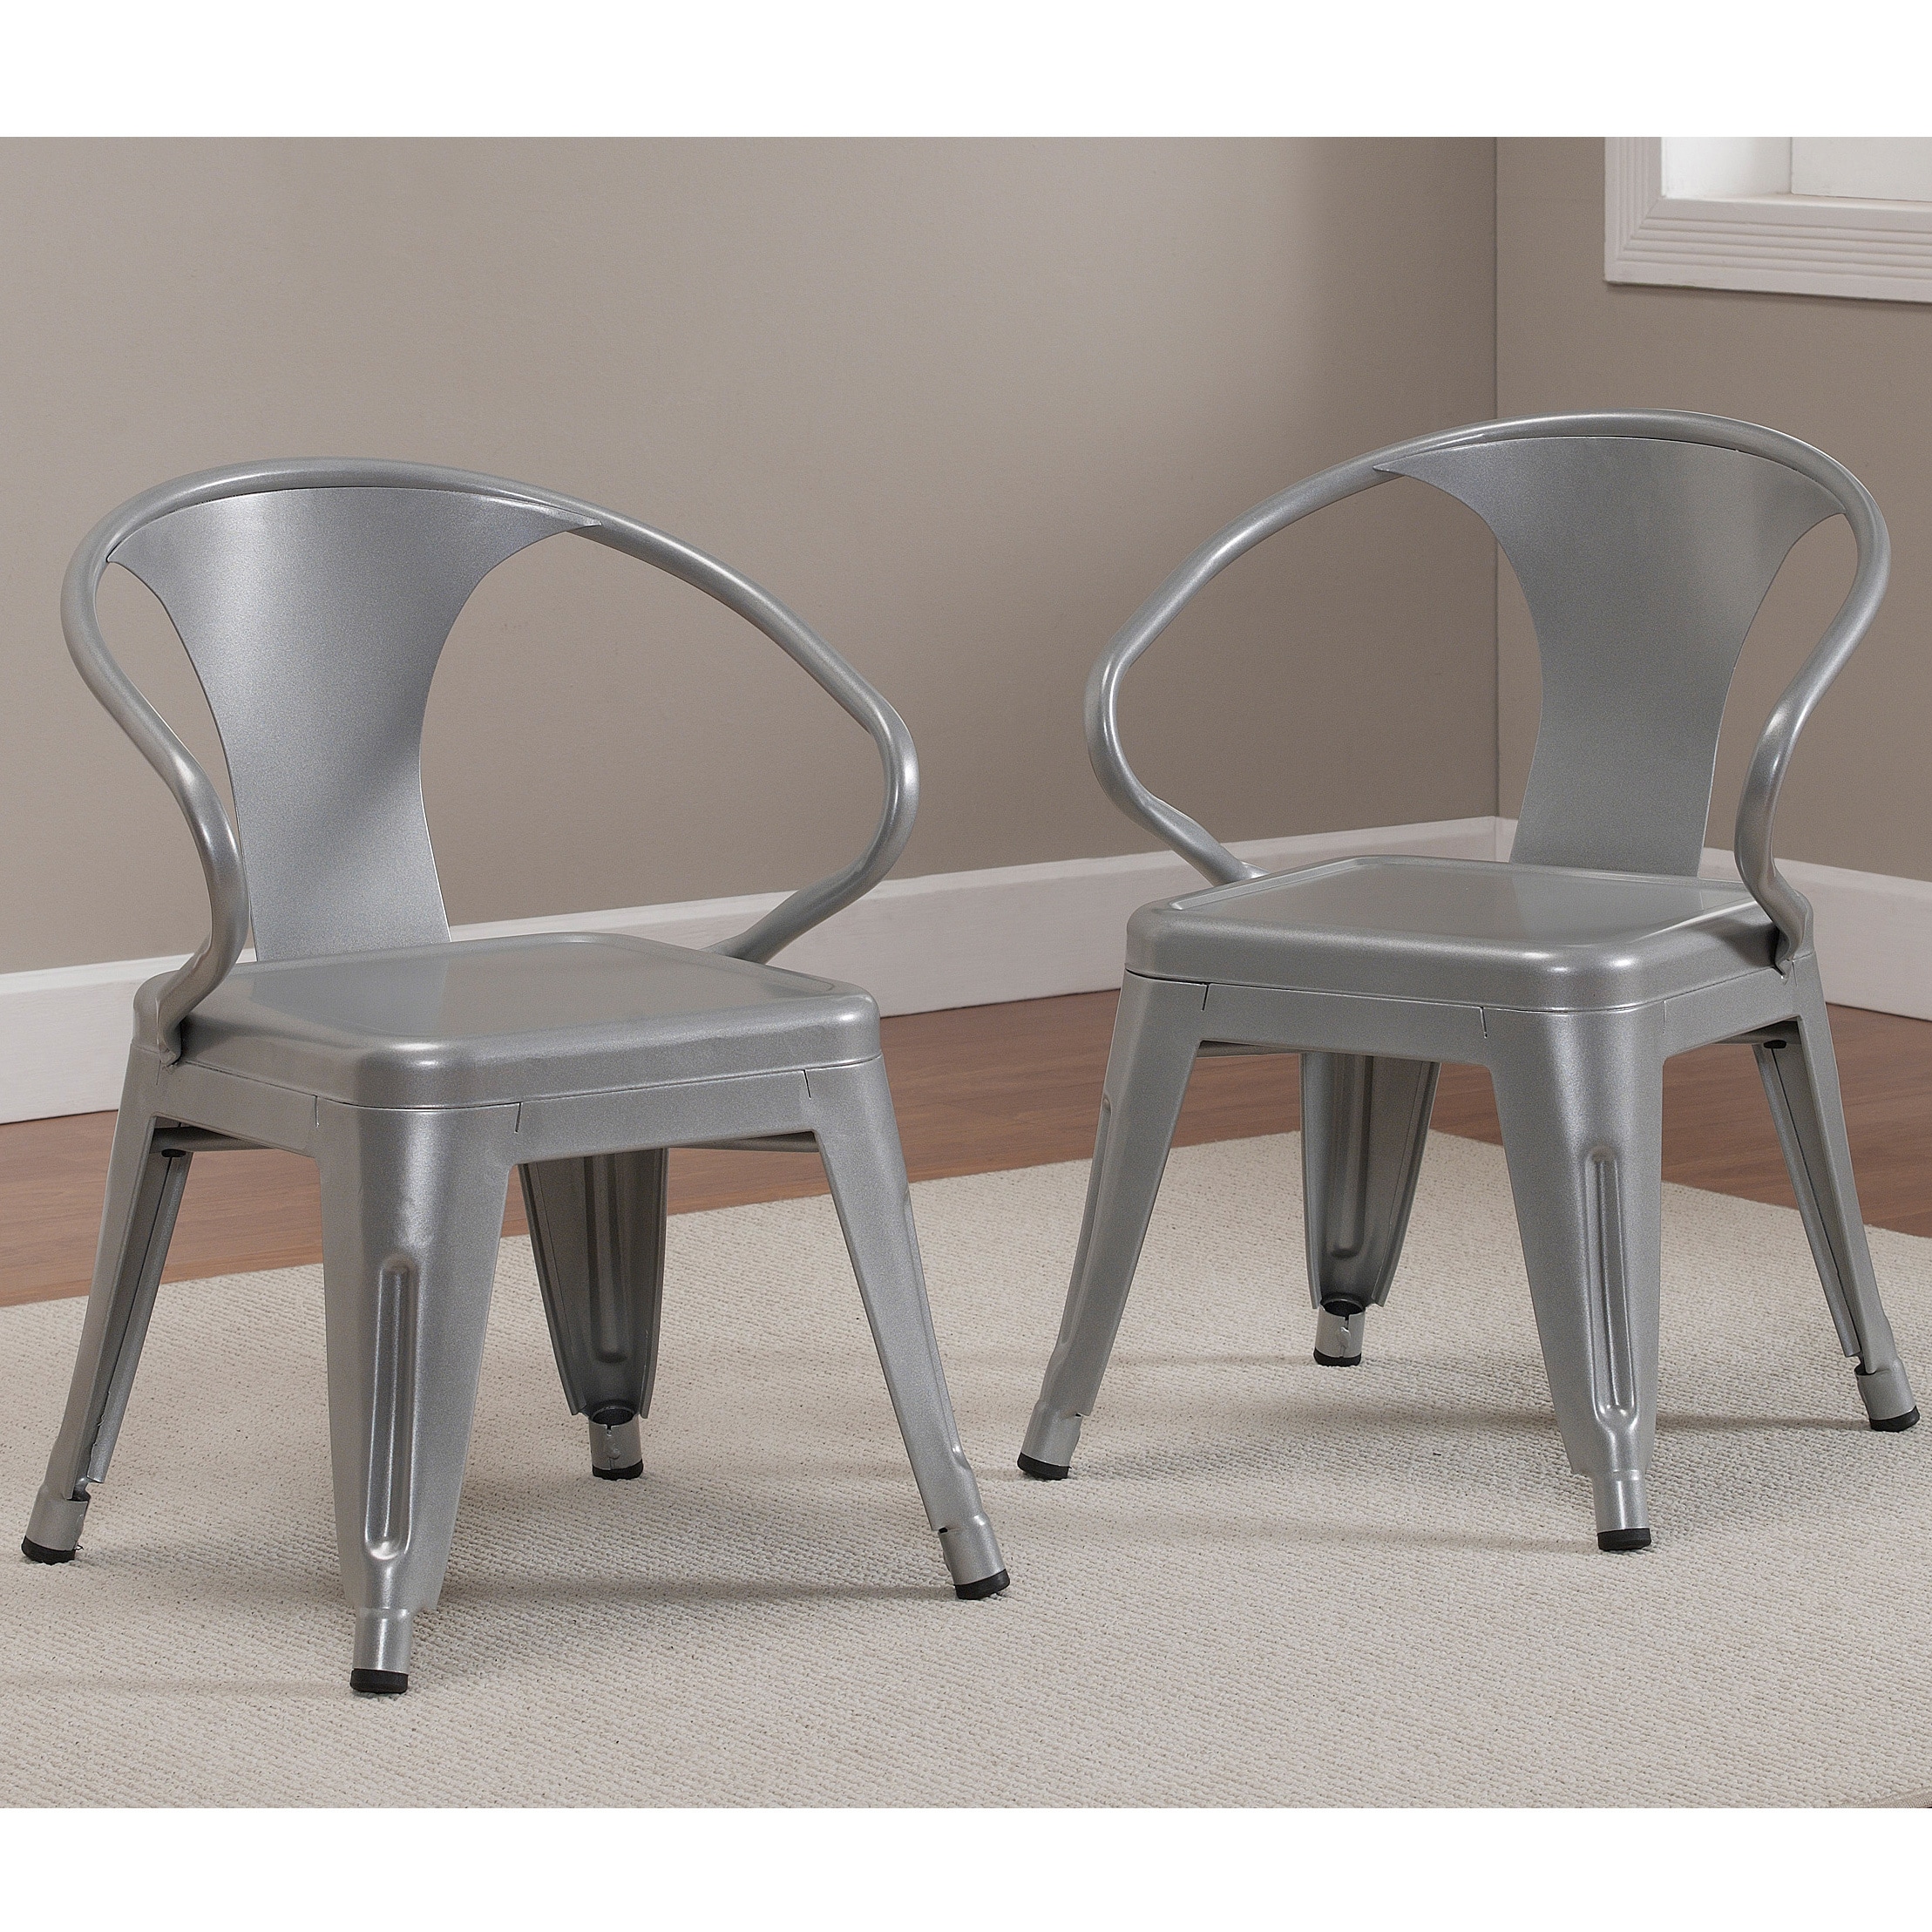 Kids Tabouret Stacking Chairs (Set of 2) Today $84.99 Sale $76.49